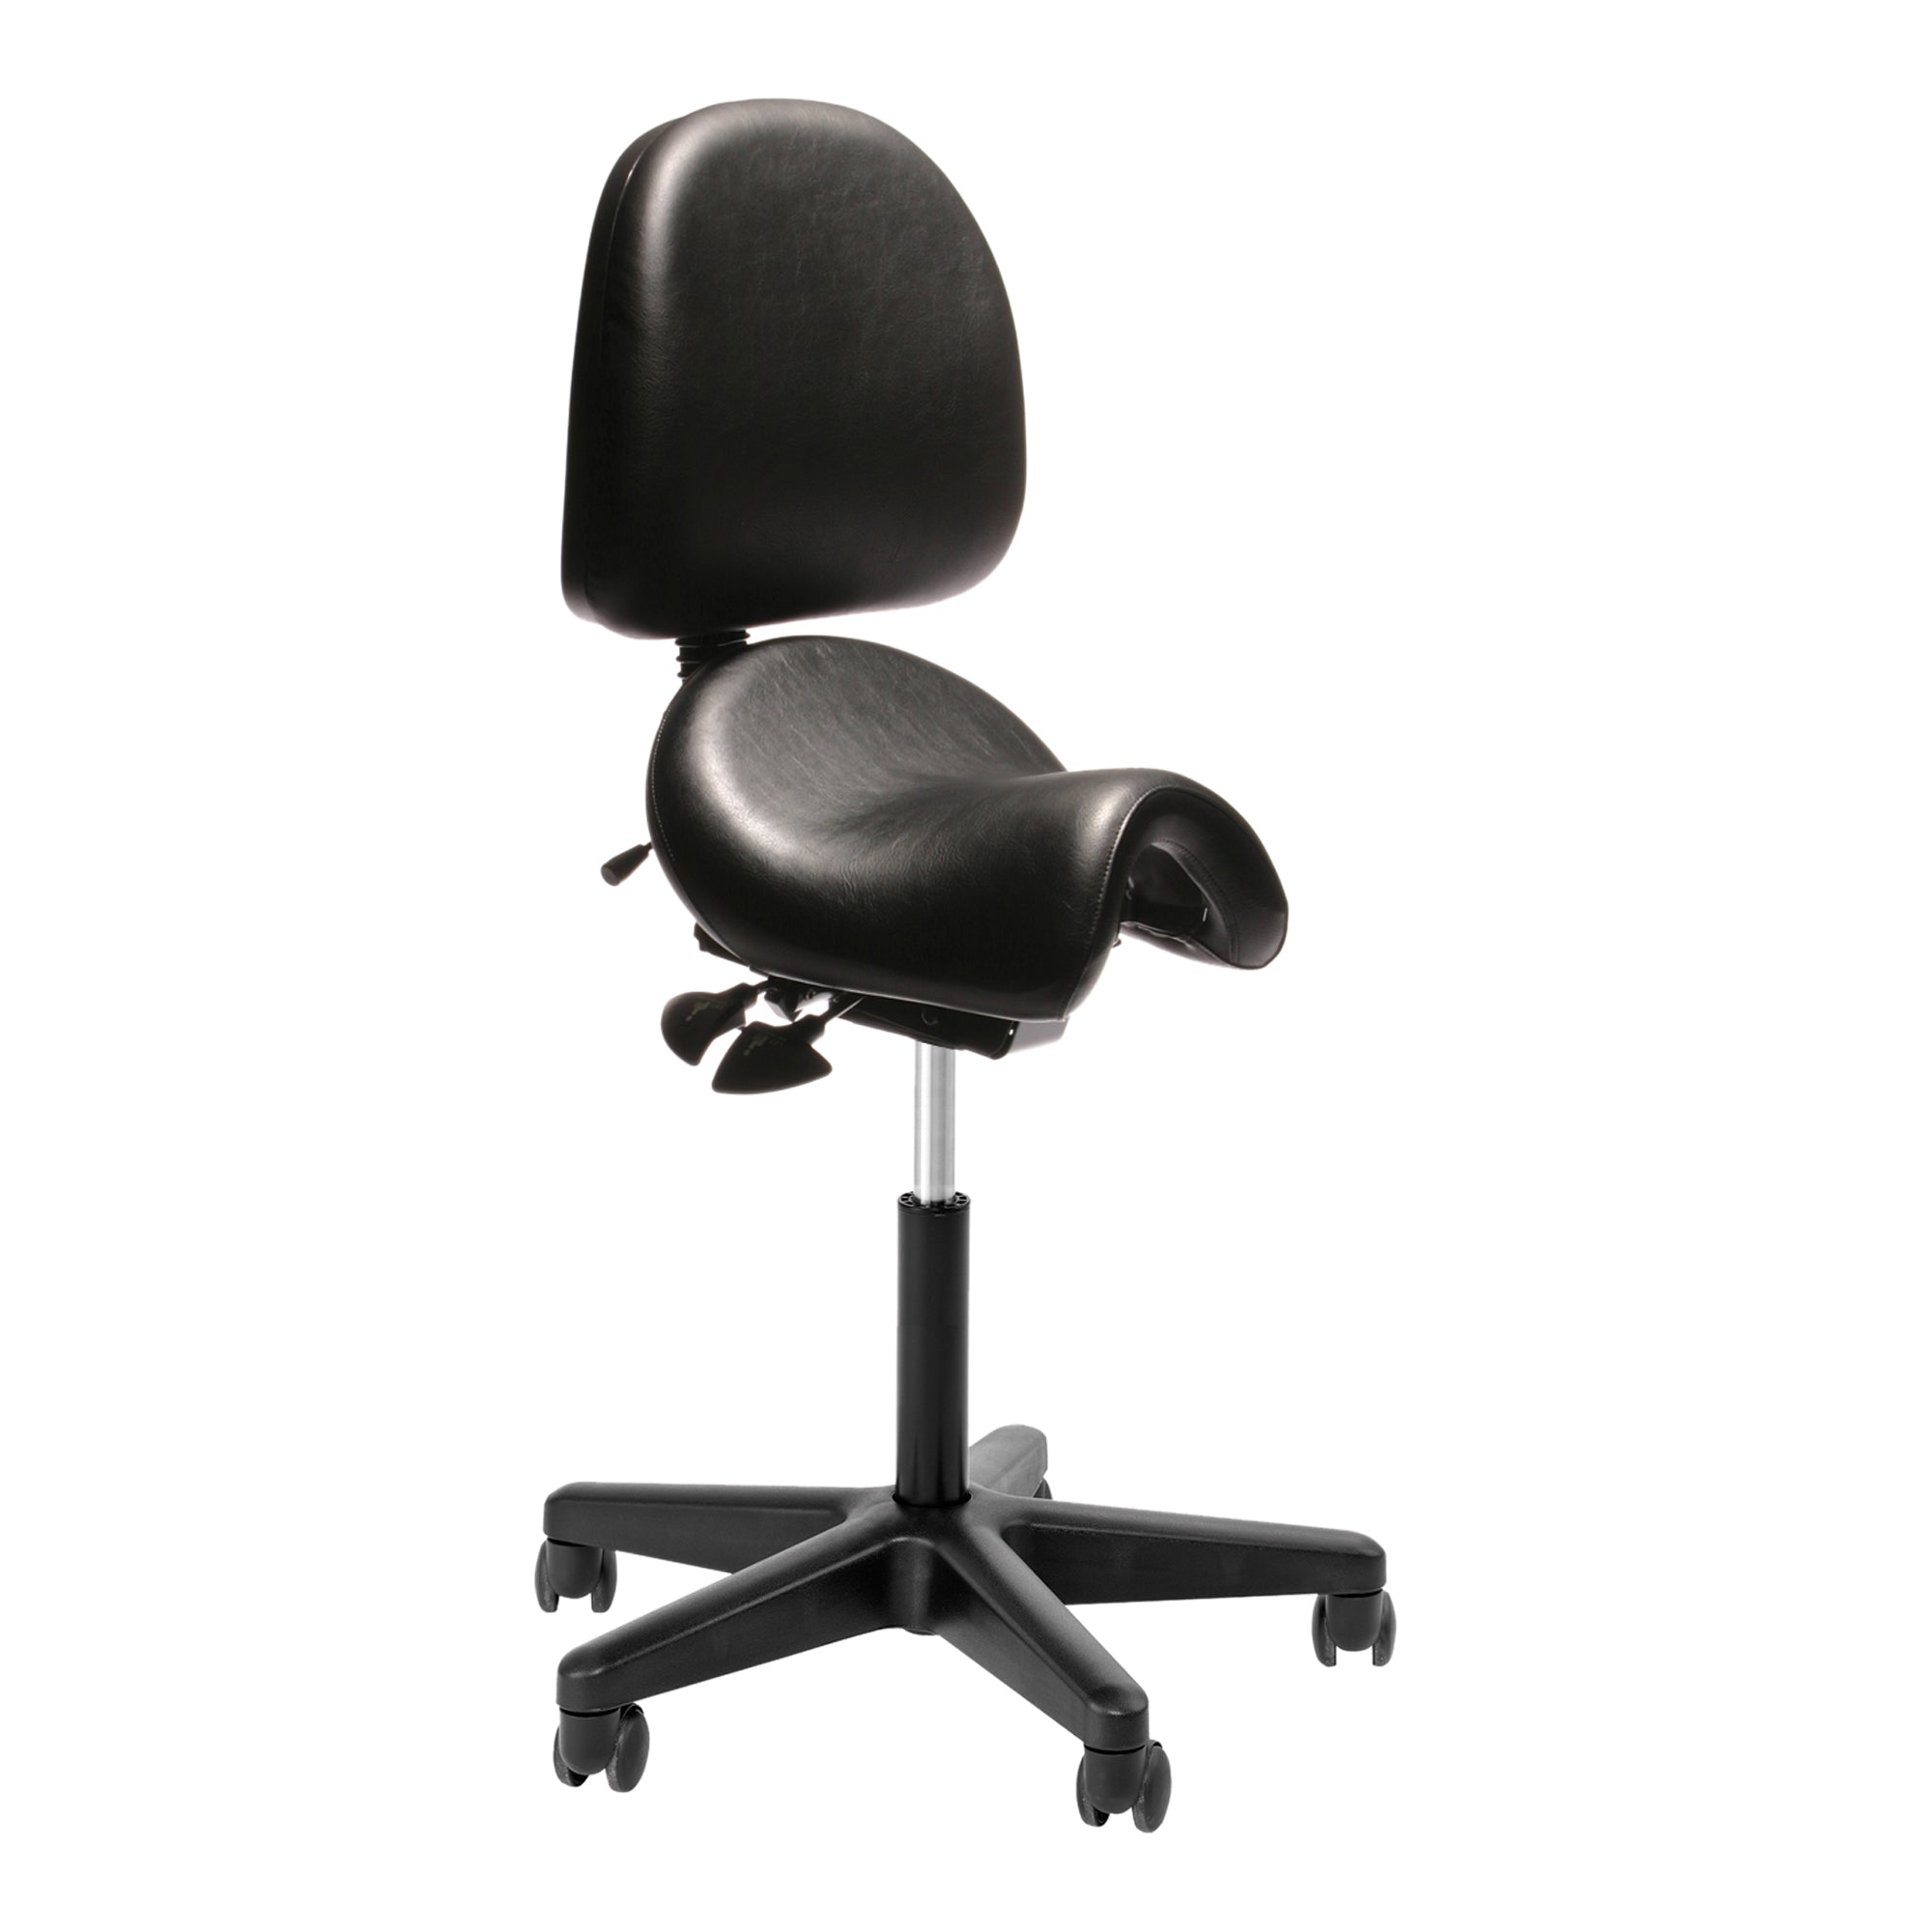 Saddle seat chair with backrest in black vinyl